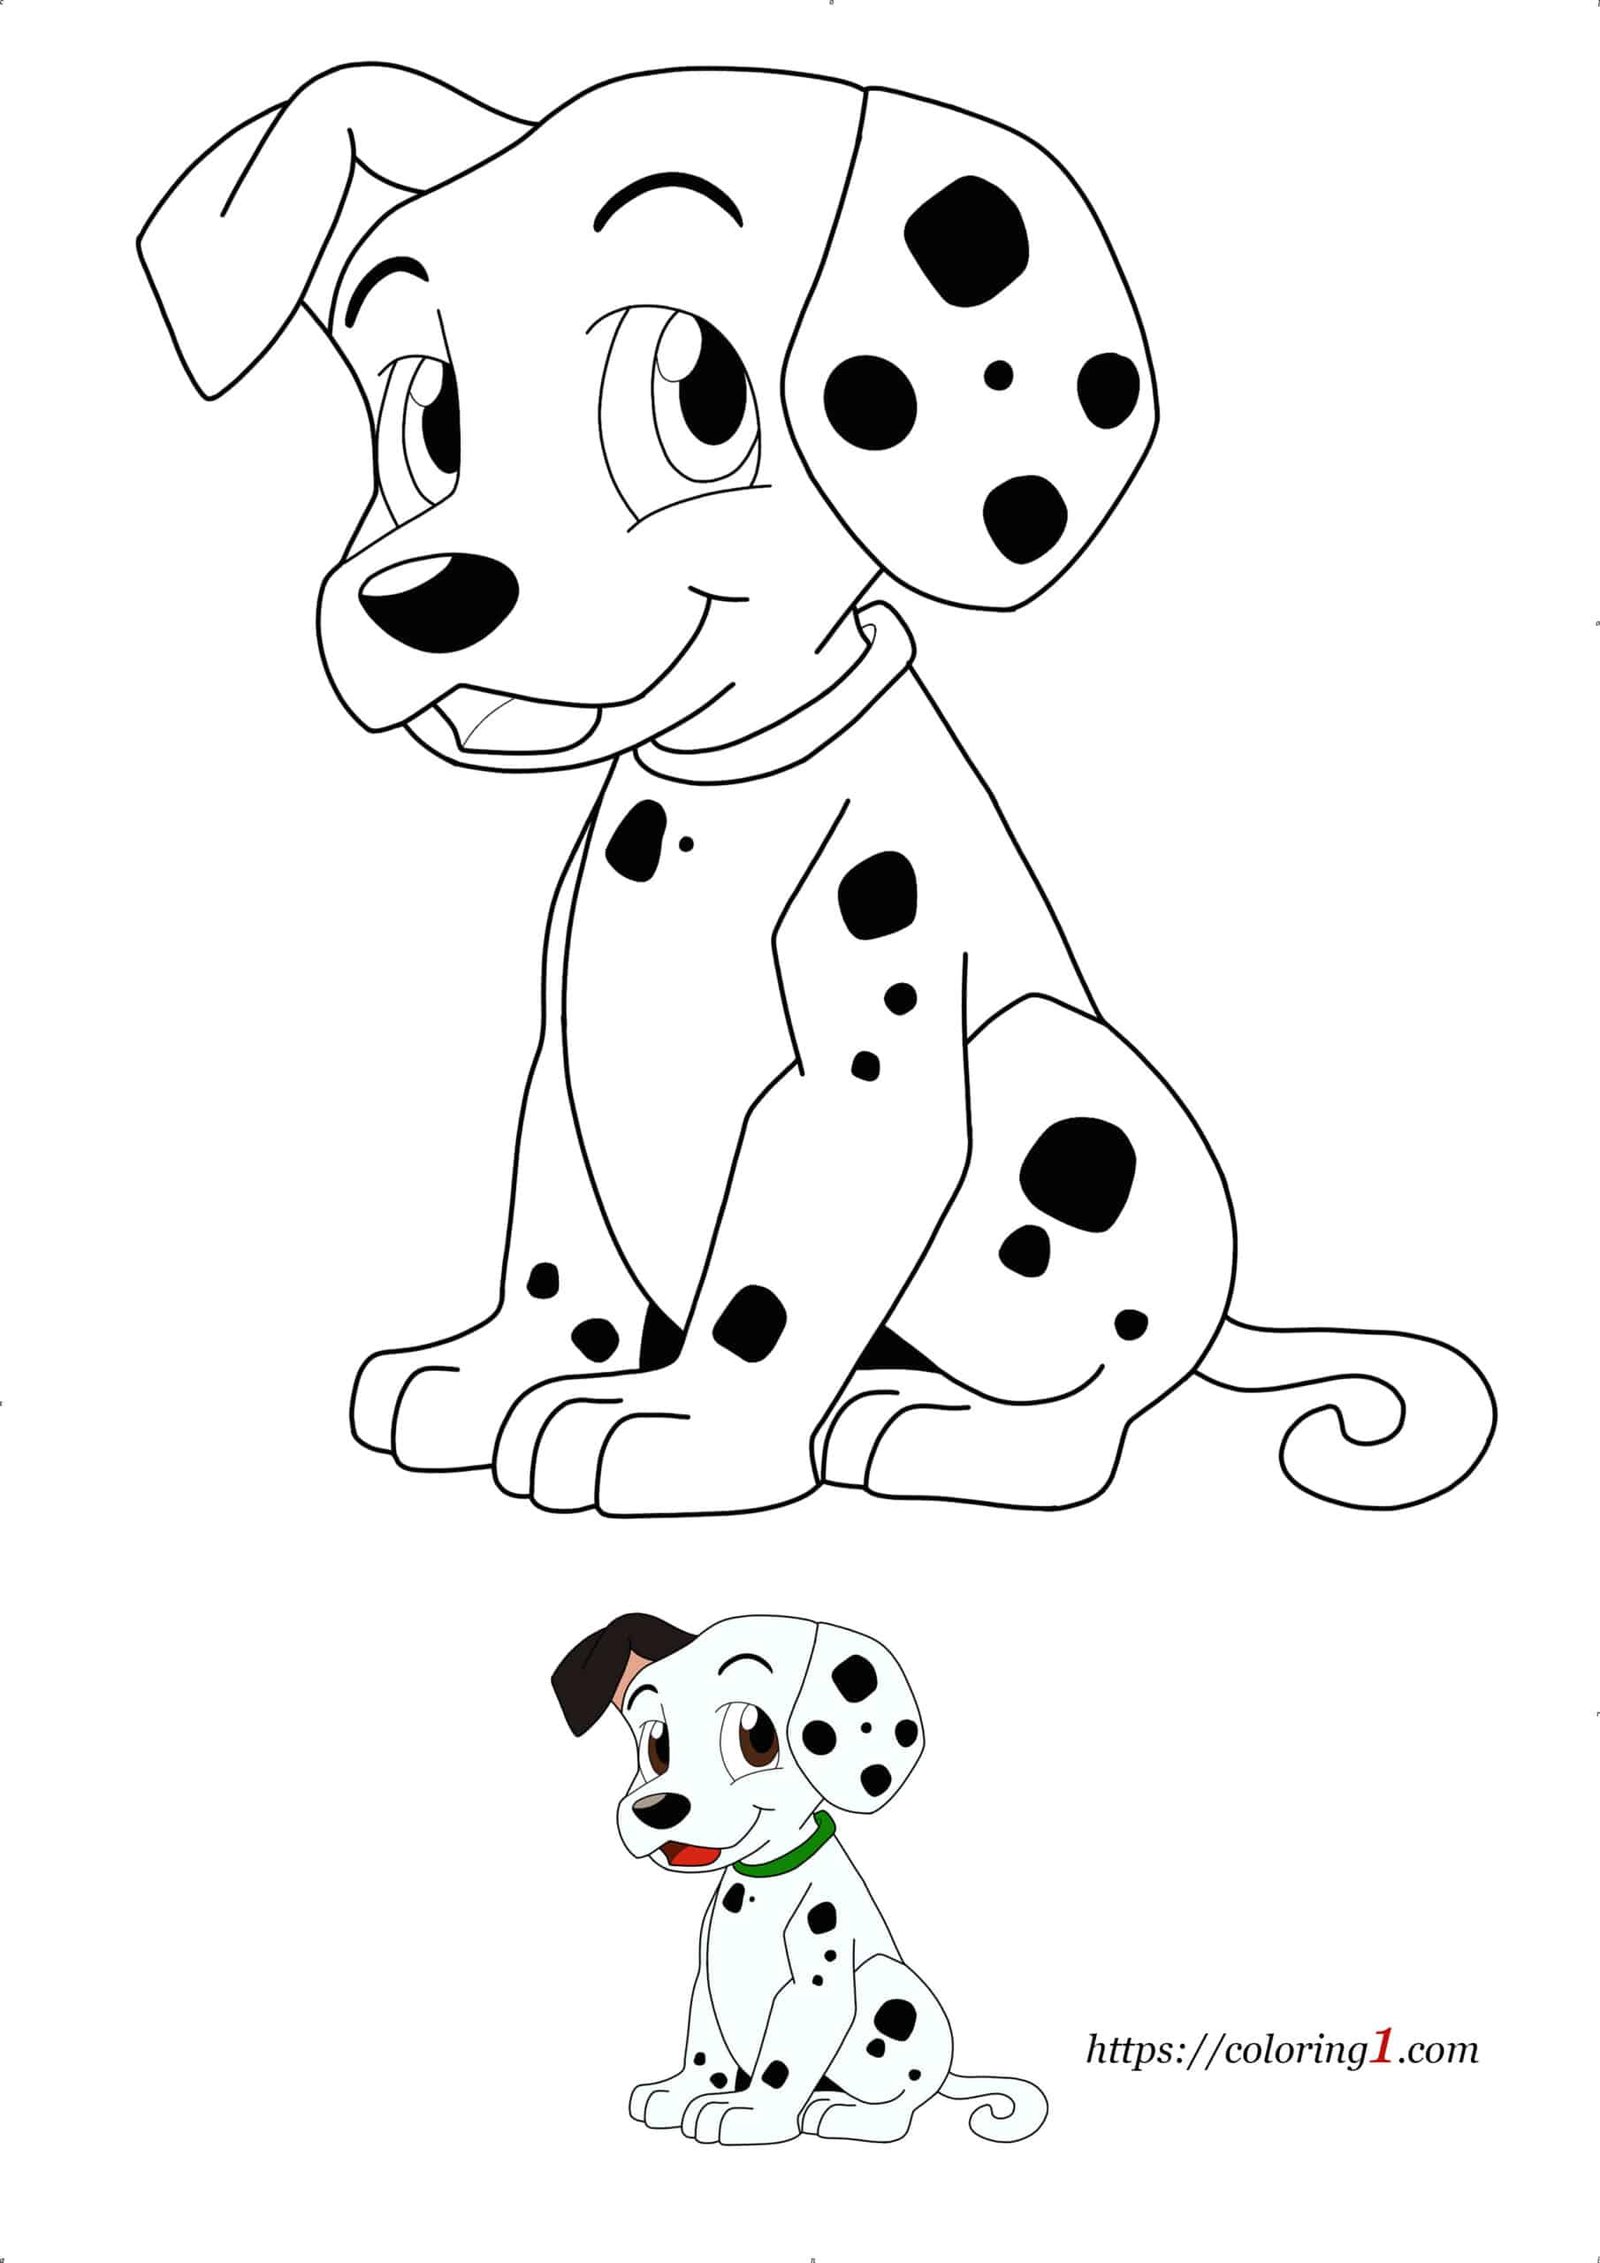 Dalmatian Dog Breed coloring page to print online